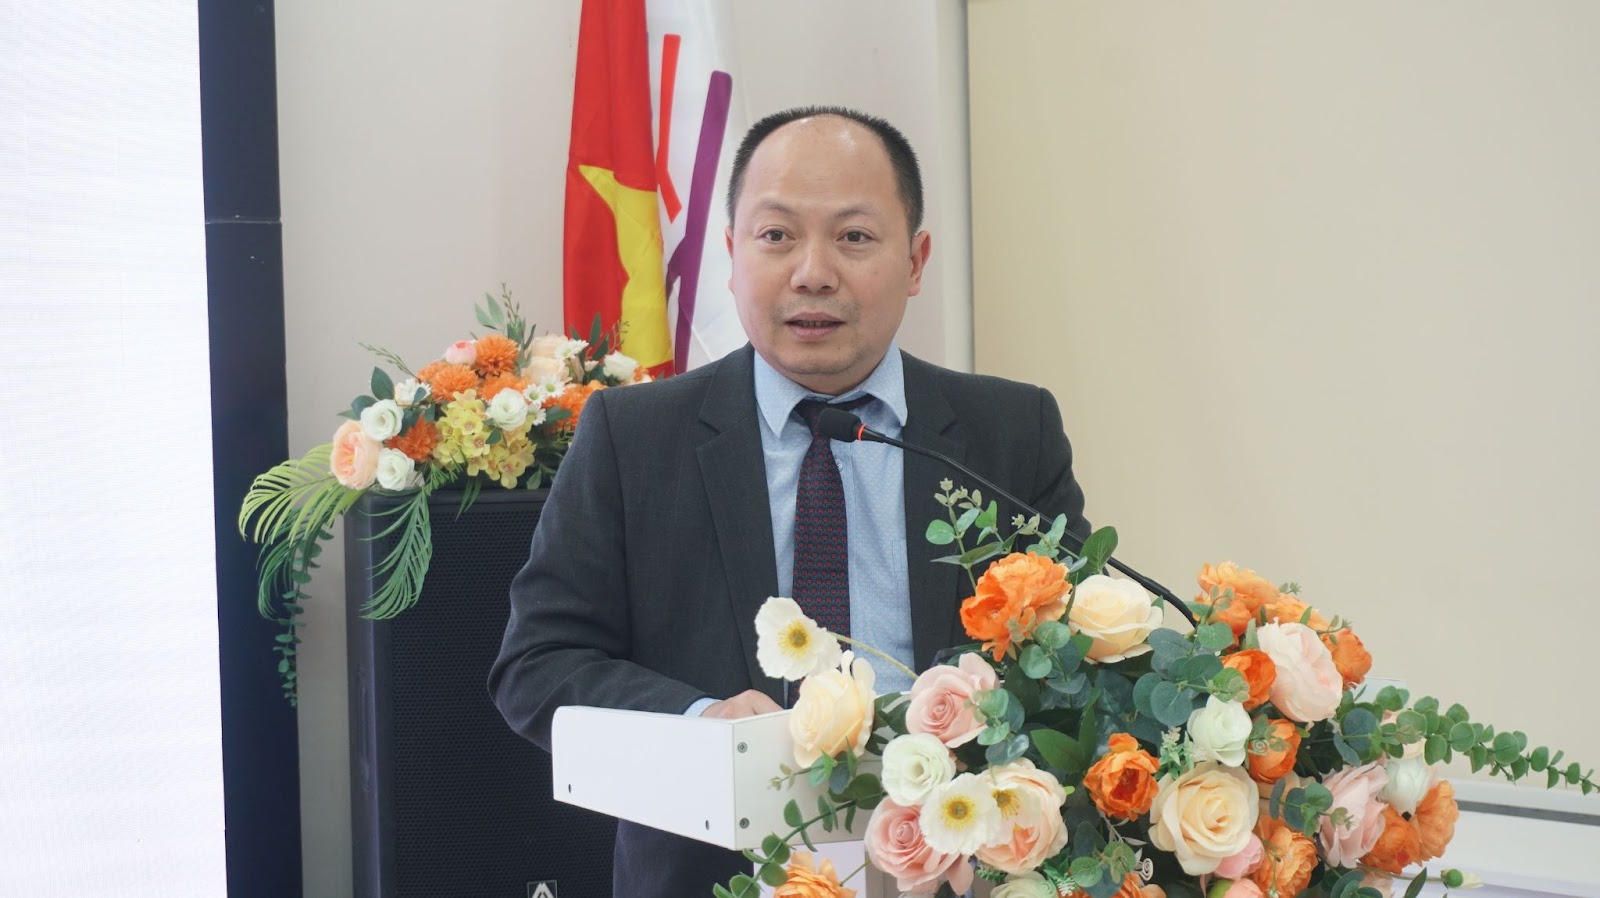 Mr. Nguyễn Trung Hiển, Secretary-General of the Vietnam-France Friendship and Cooperation Association (AACFV), Deputy Head of the Science and Technology Department at VNU